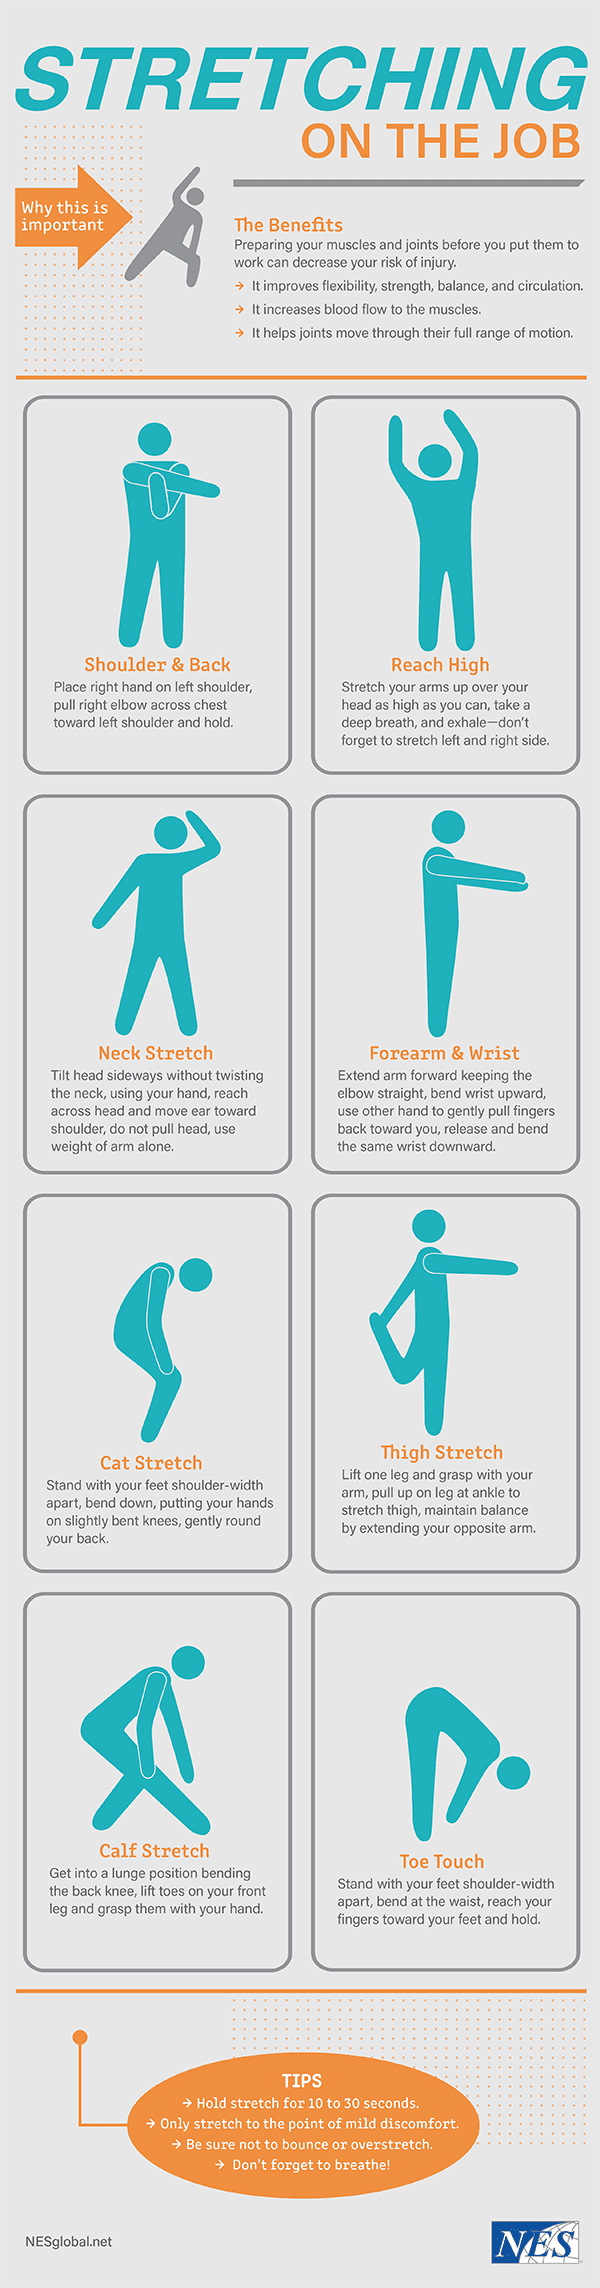 Stretching Infographic-05 copy